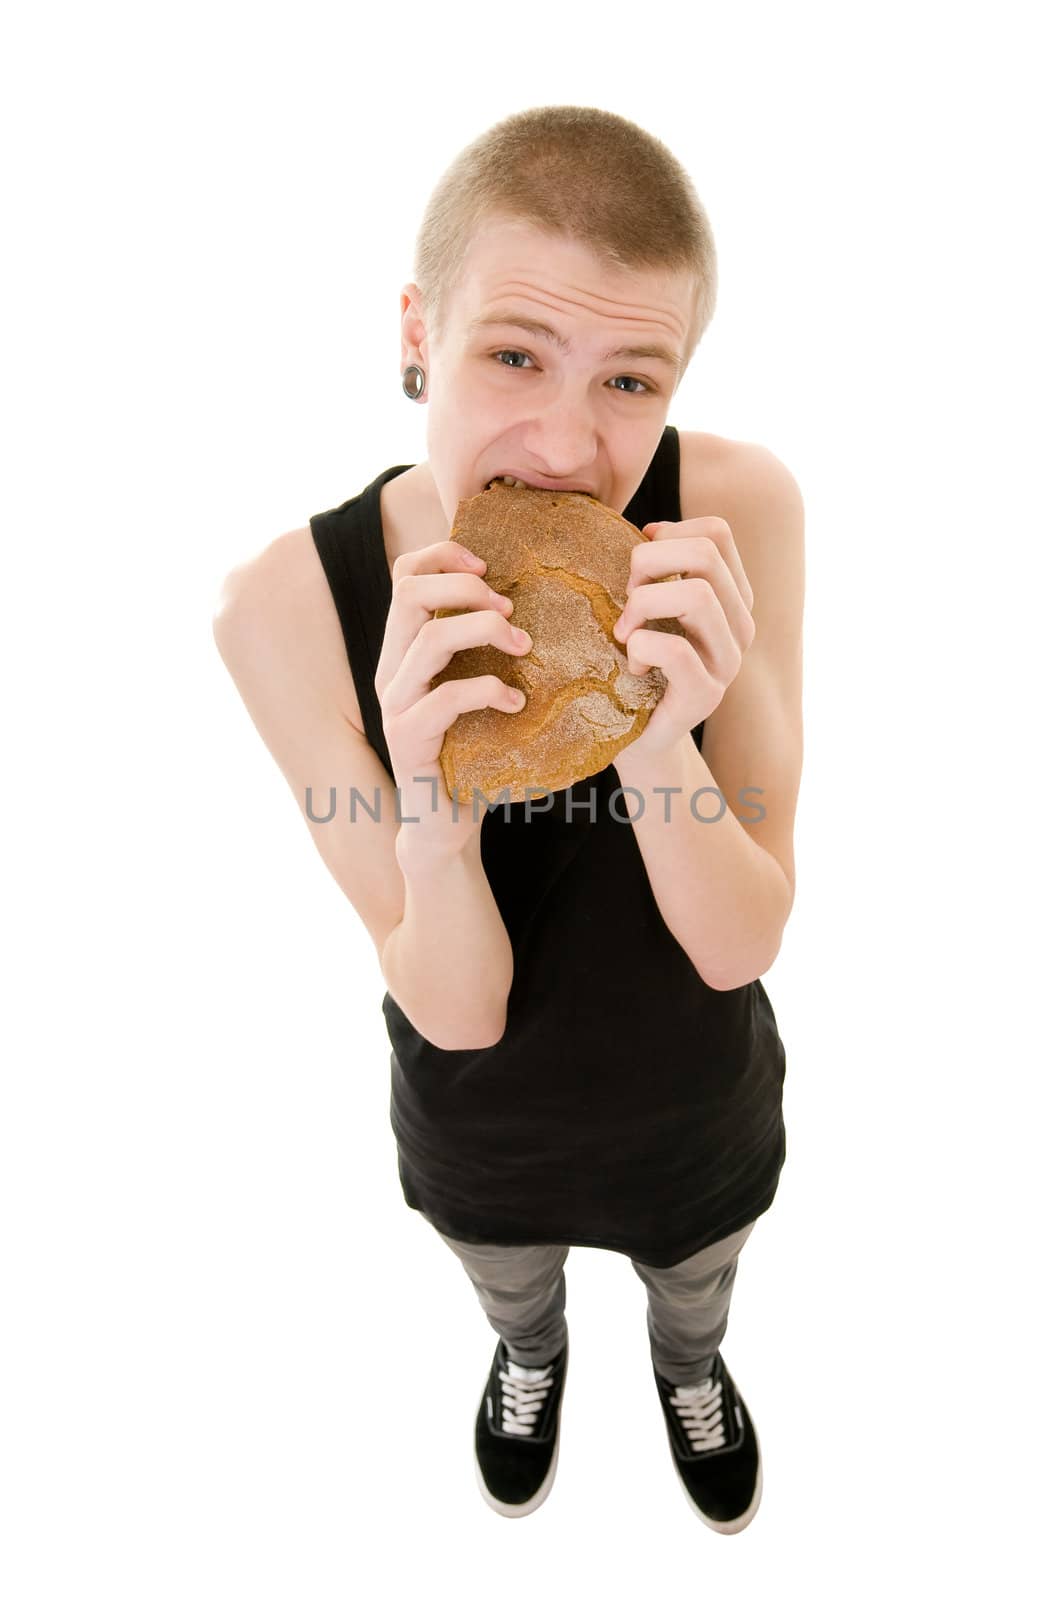 The hungry teenager eating a bread isolated on white background